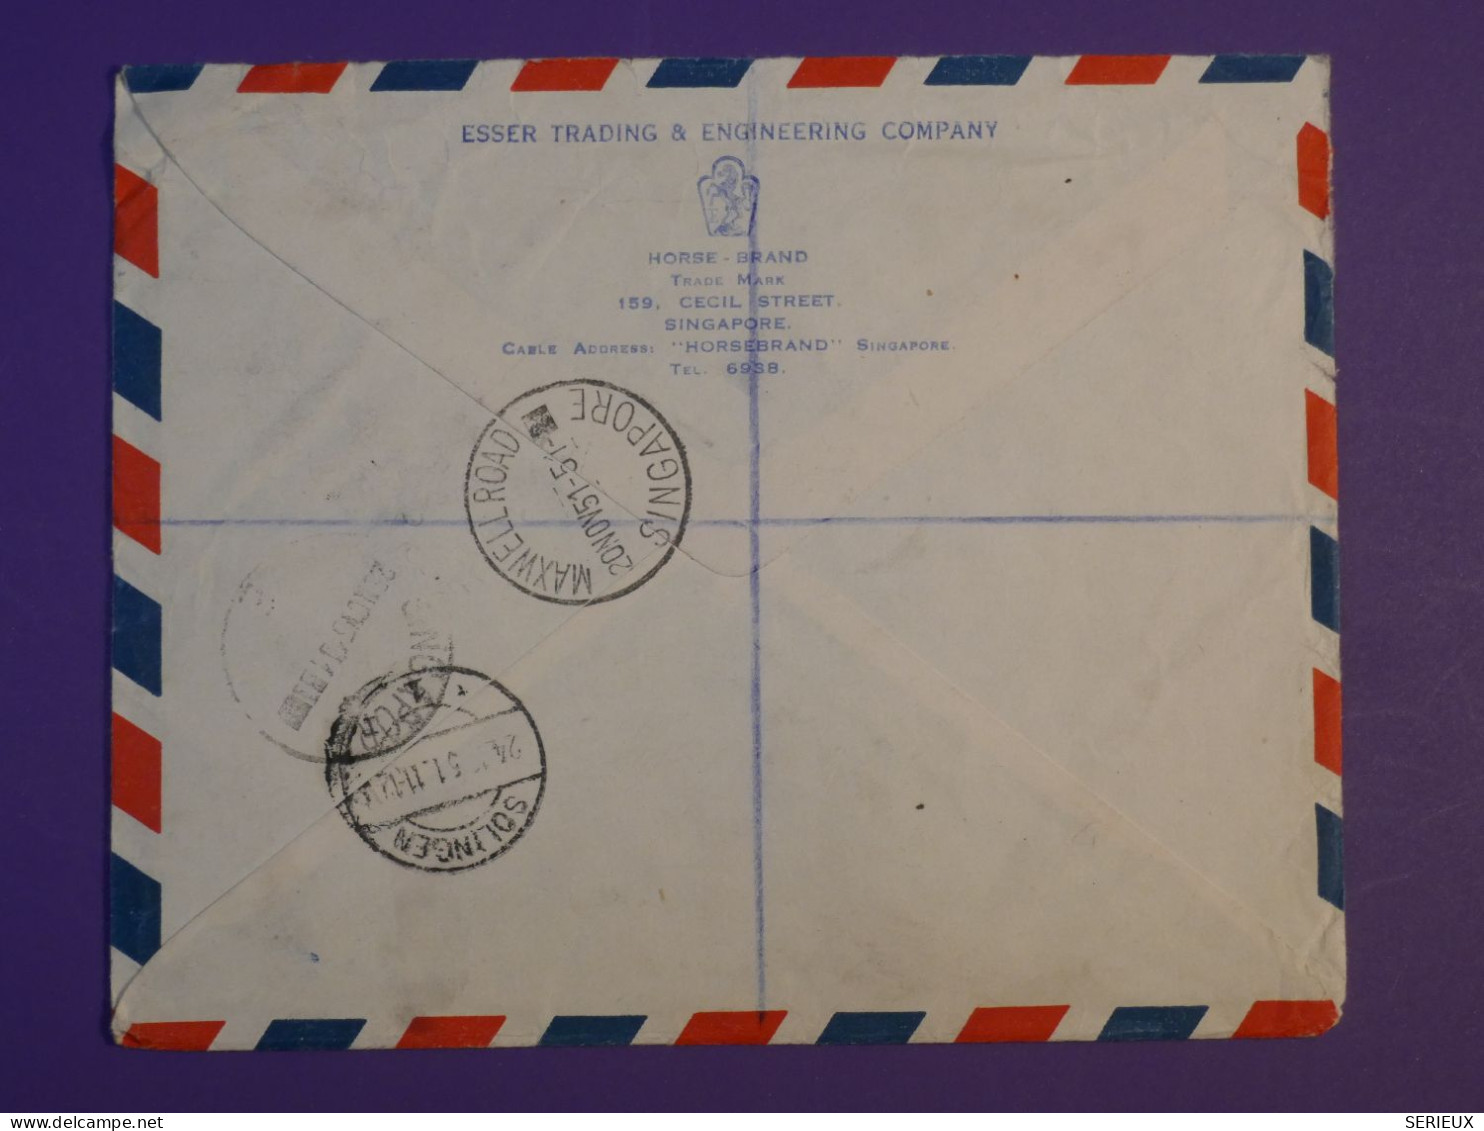 DG1 MALAYSIE SINGAPORE BELLE LETTRE RECO.  1951   A SOLINGEN GERMANY +AFF. INTERESSANT++ +++ - Malaya (British Military Administration)